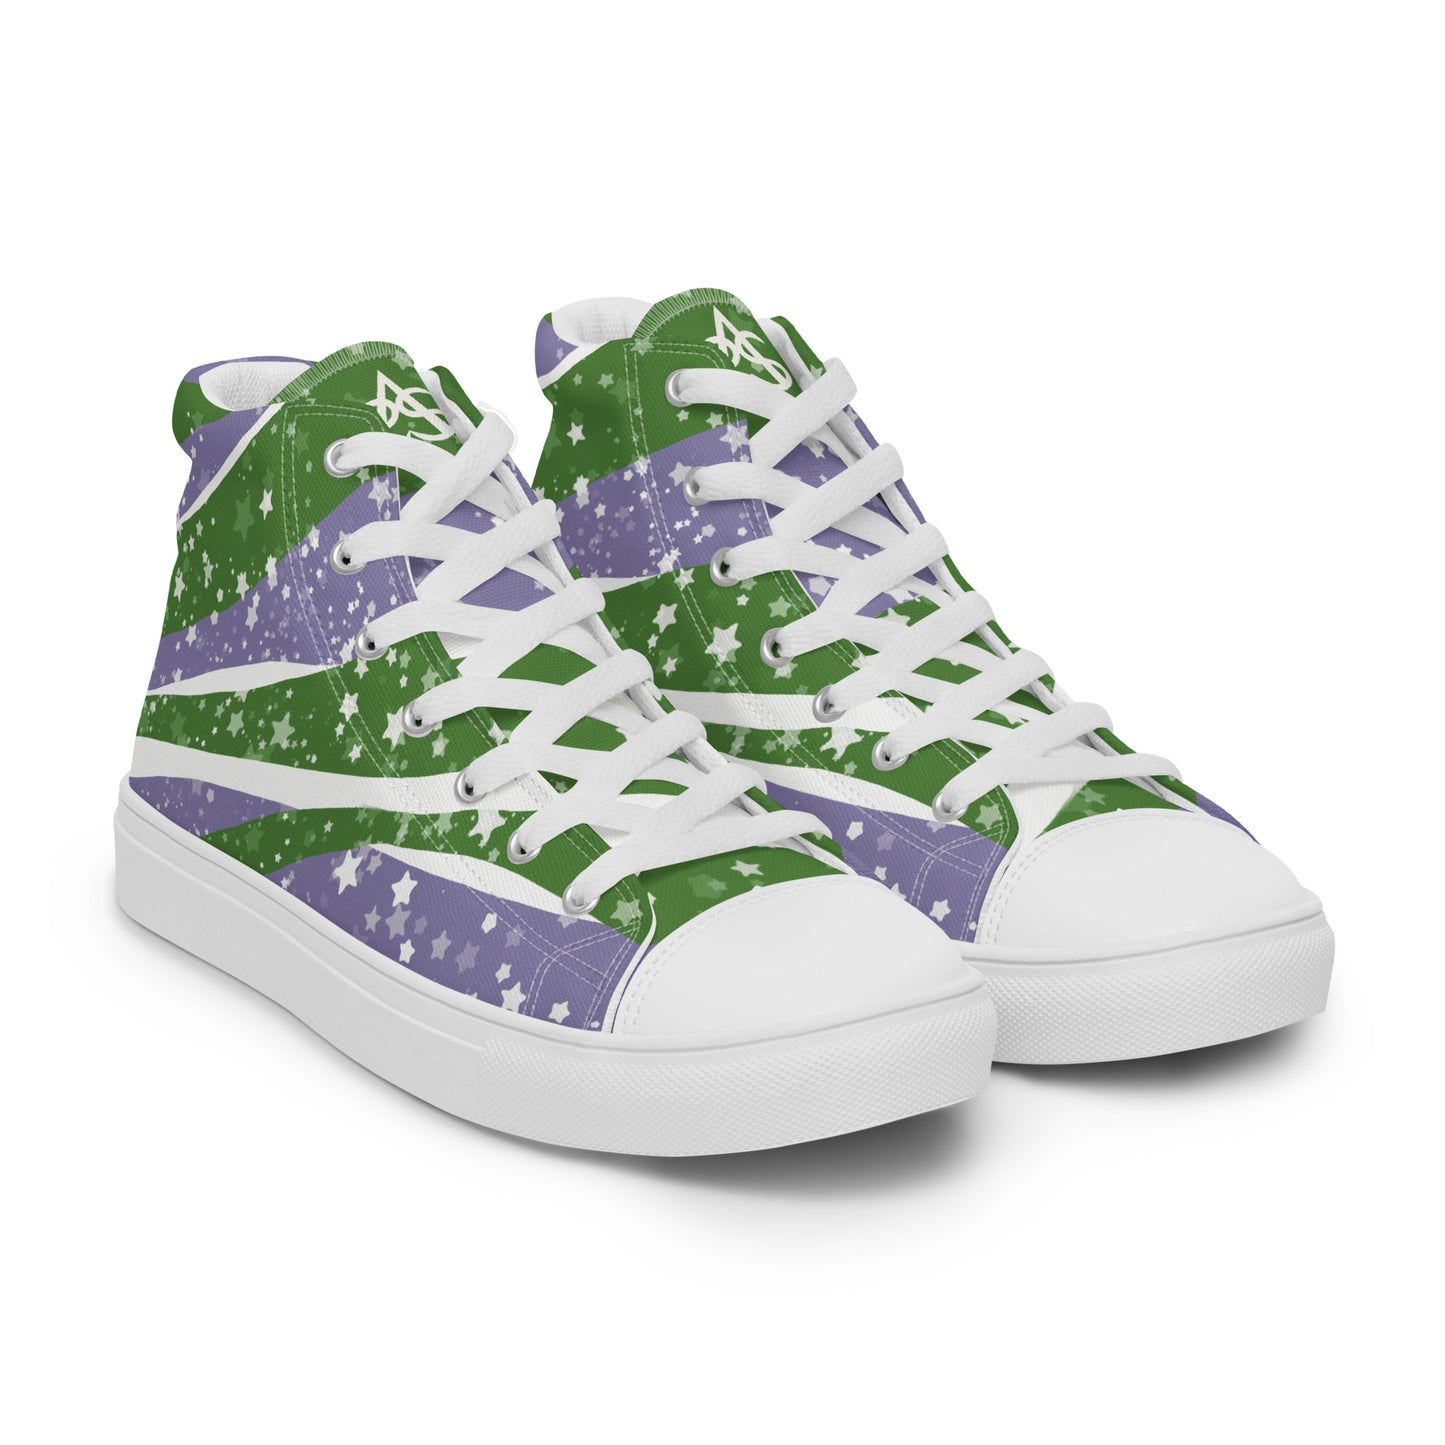 Right front view: a pair of high top shoes with green, purple, and white ribbons that get larger from heel to laces, white stars, and the Aras Sivad logo on the tongue.